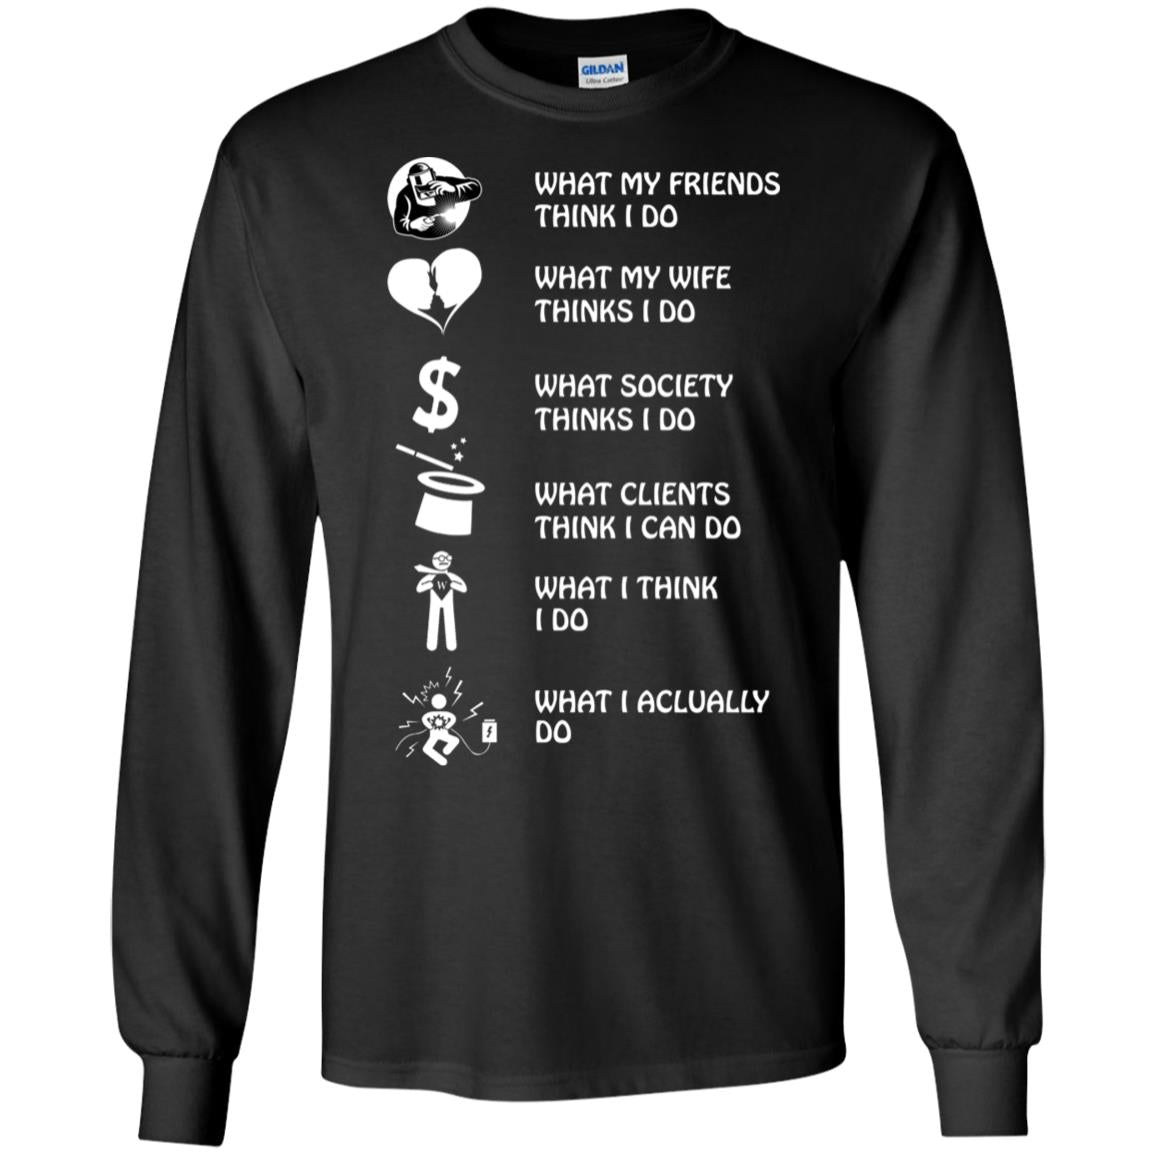 What My Friends Thinks I Do What My Wife Thinks I Do What Society Thinks I Do What Clients Thinks I Can Do What I Think I Do What I Actually DoG240 Gildan LS Ultra Cotton T-Shirt